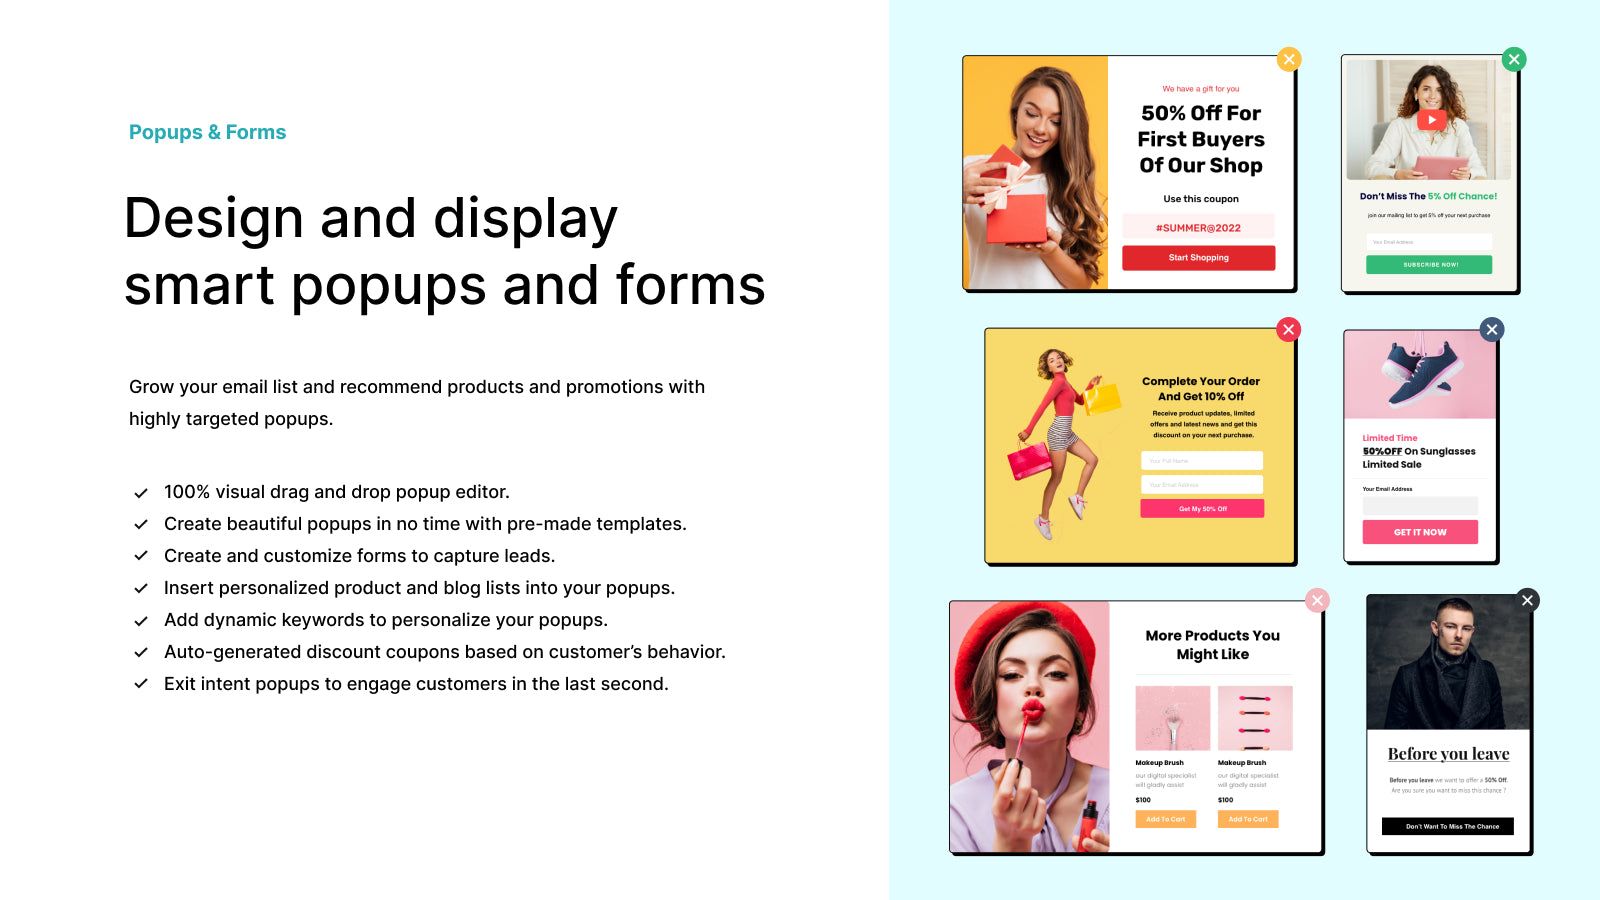 Design and display smart popups and forms